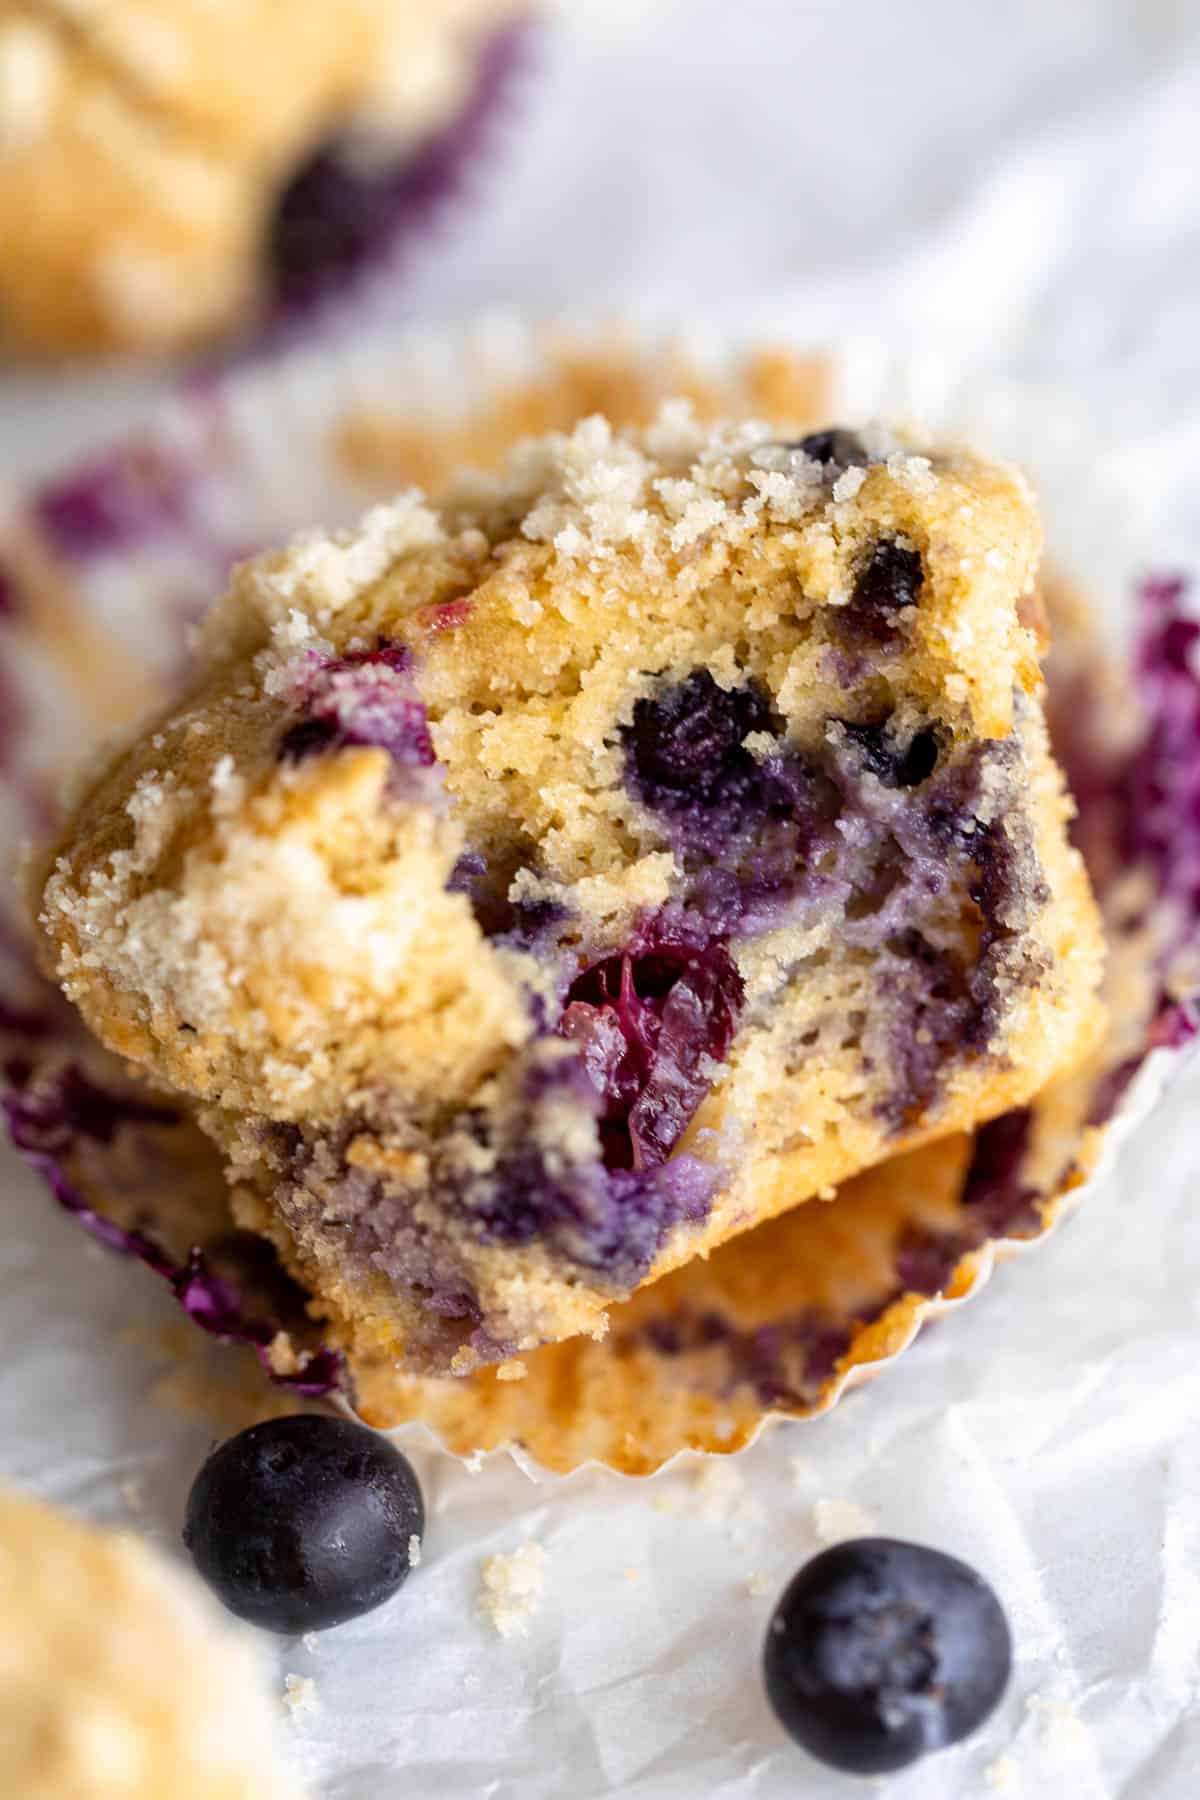 one bite taken out of the muffin to show texture